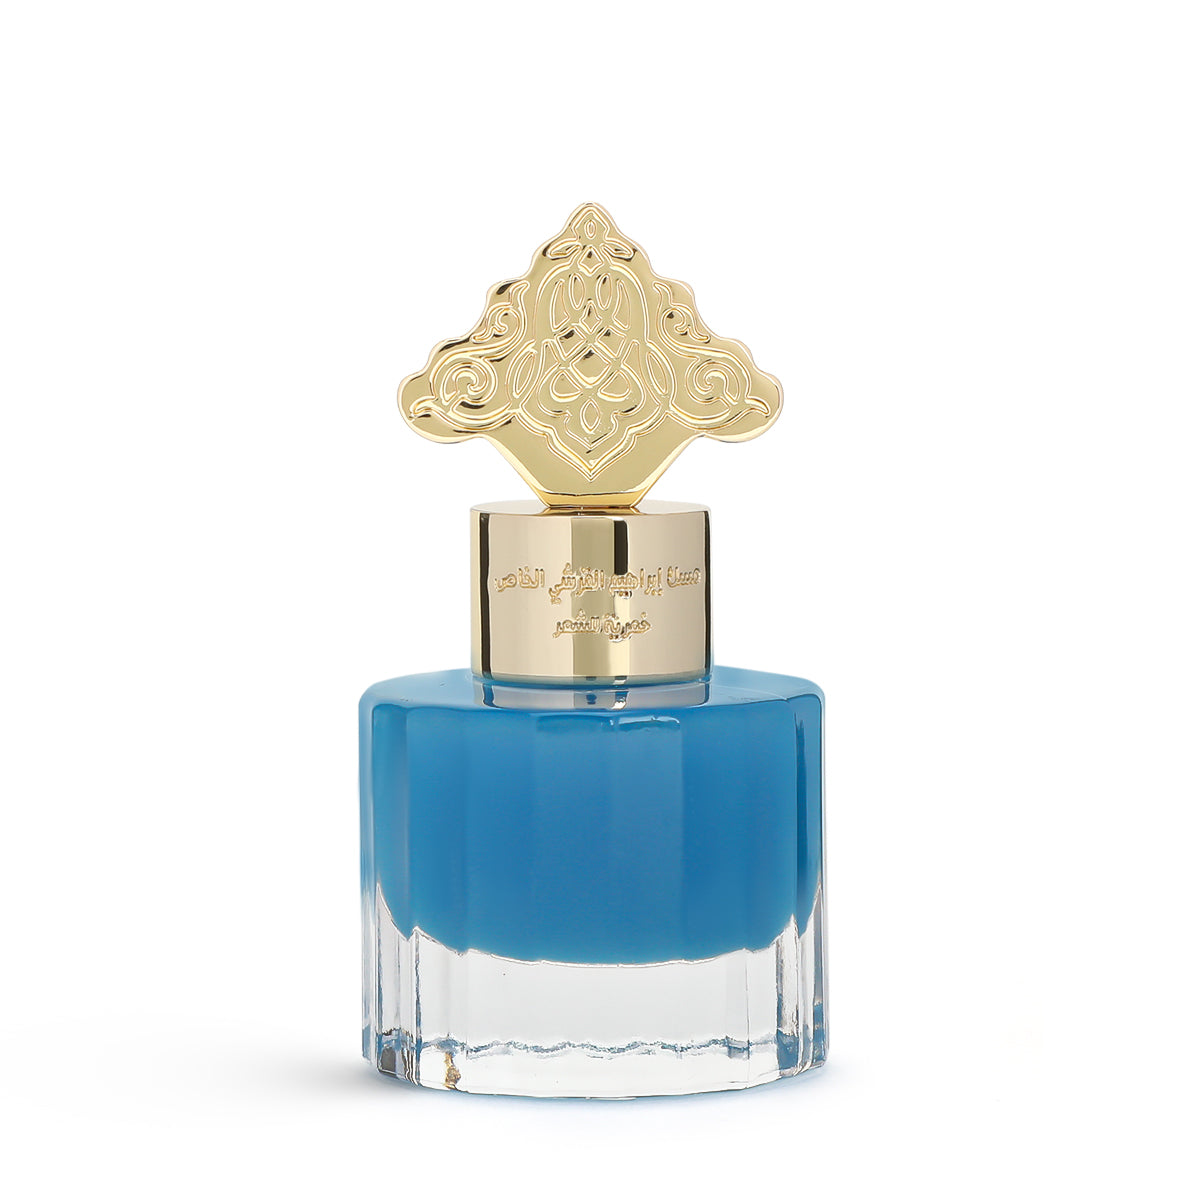 This image features a square-shaped perfume bottle with a blue gradient color, transitioning from a darker blue at the top to clear at the bottom. The cap is gold with intricate, ornate patterns resembling traditional Arabic designs. Arabic script is present on the gold band just below the cap, likely denoting the brand or fragrance name.